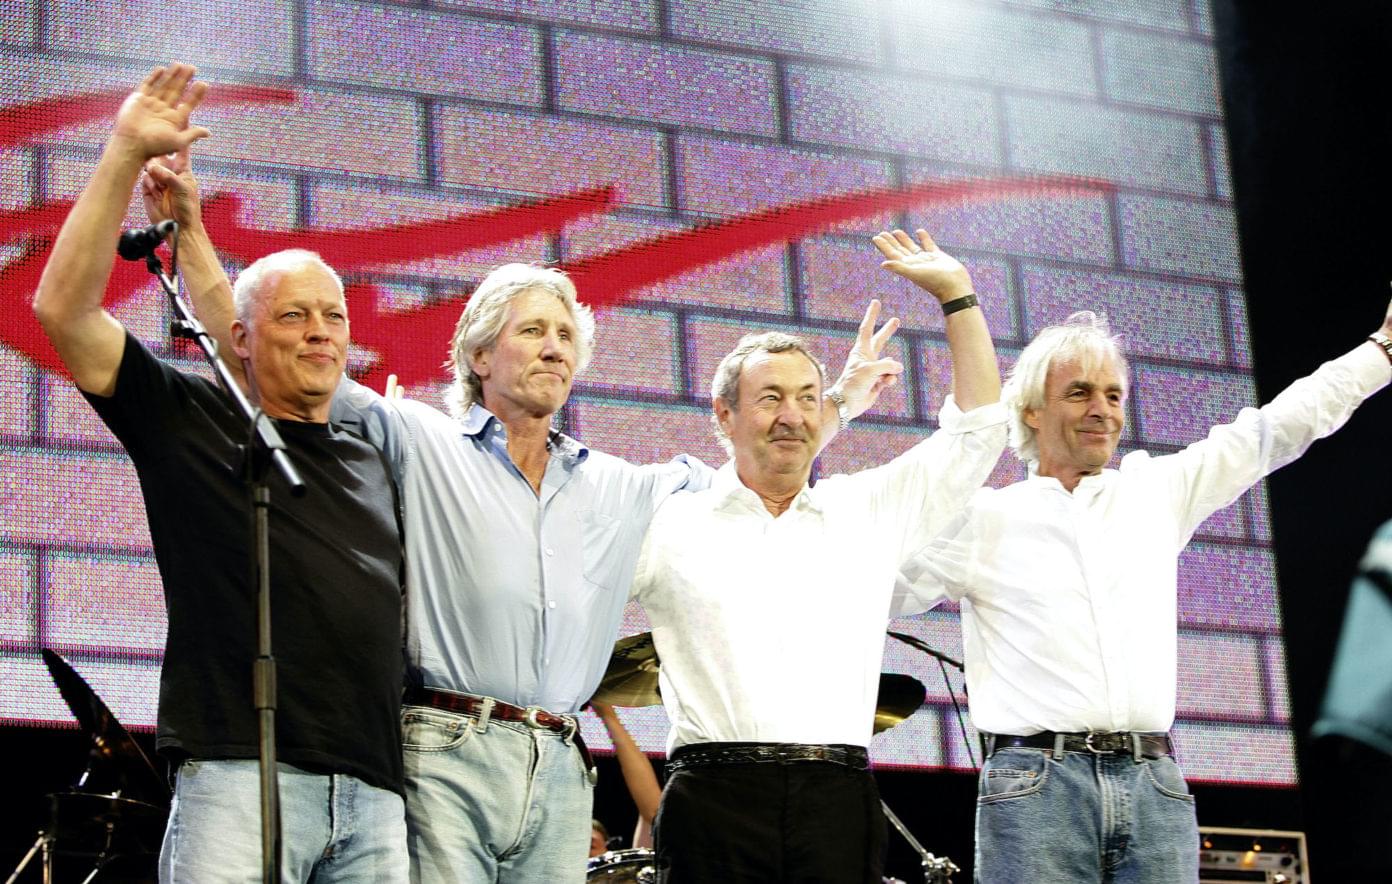 David Gilmour on Pink Floyd reunion: “It has run its course, we are done”